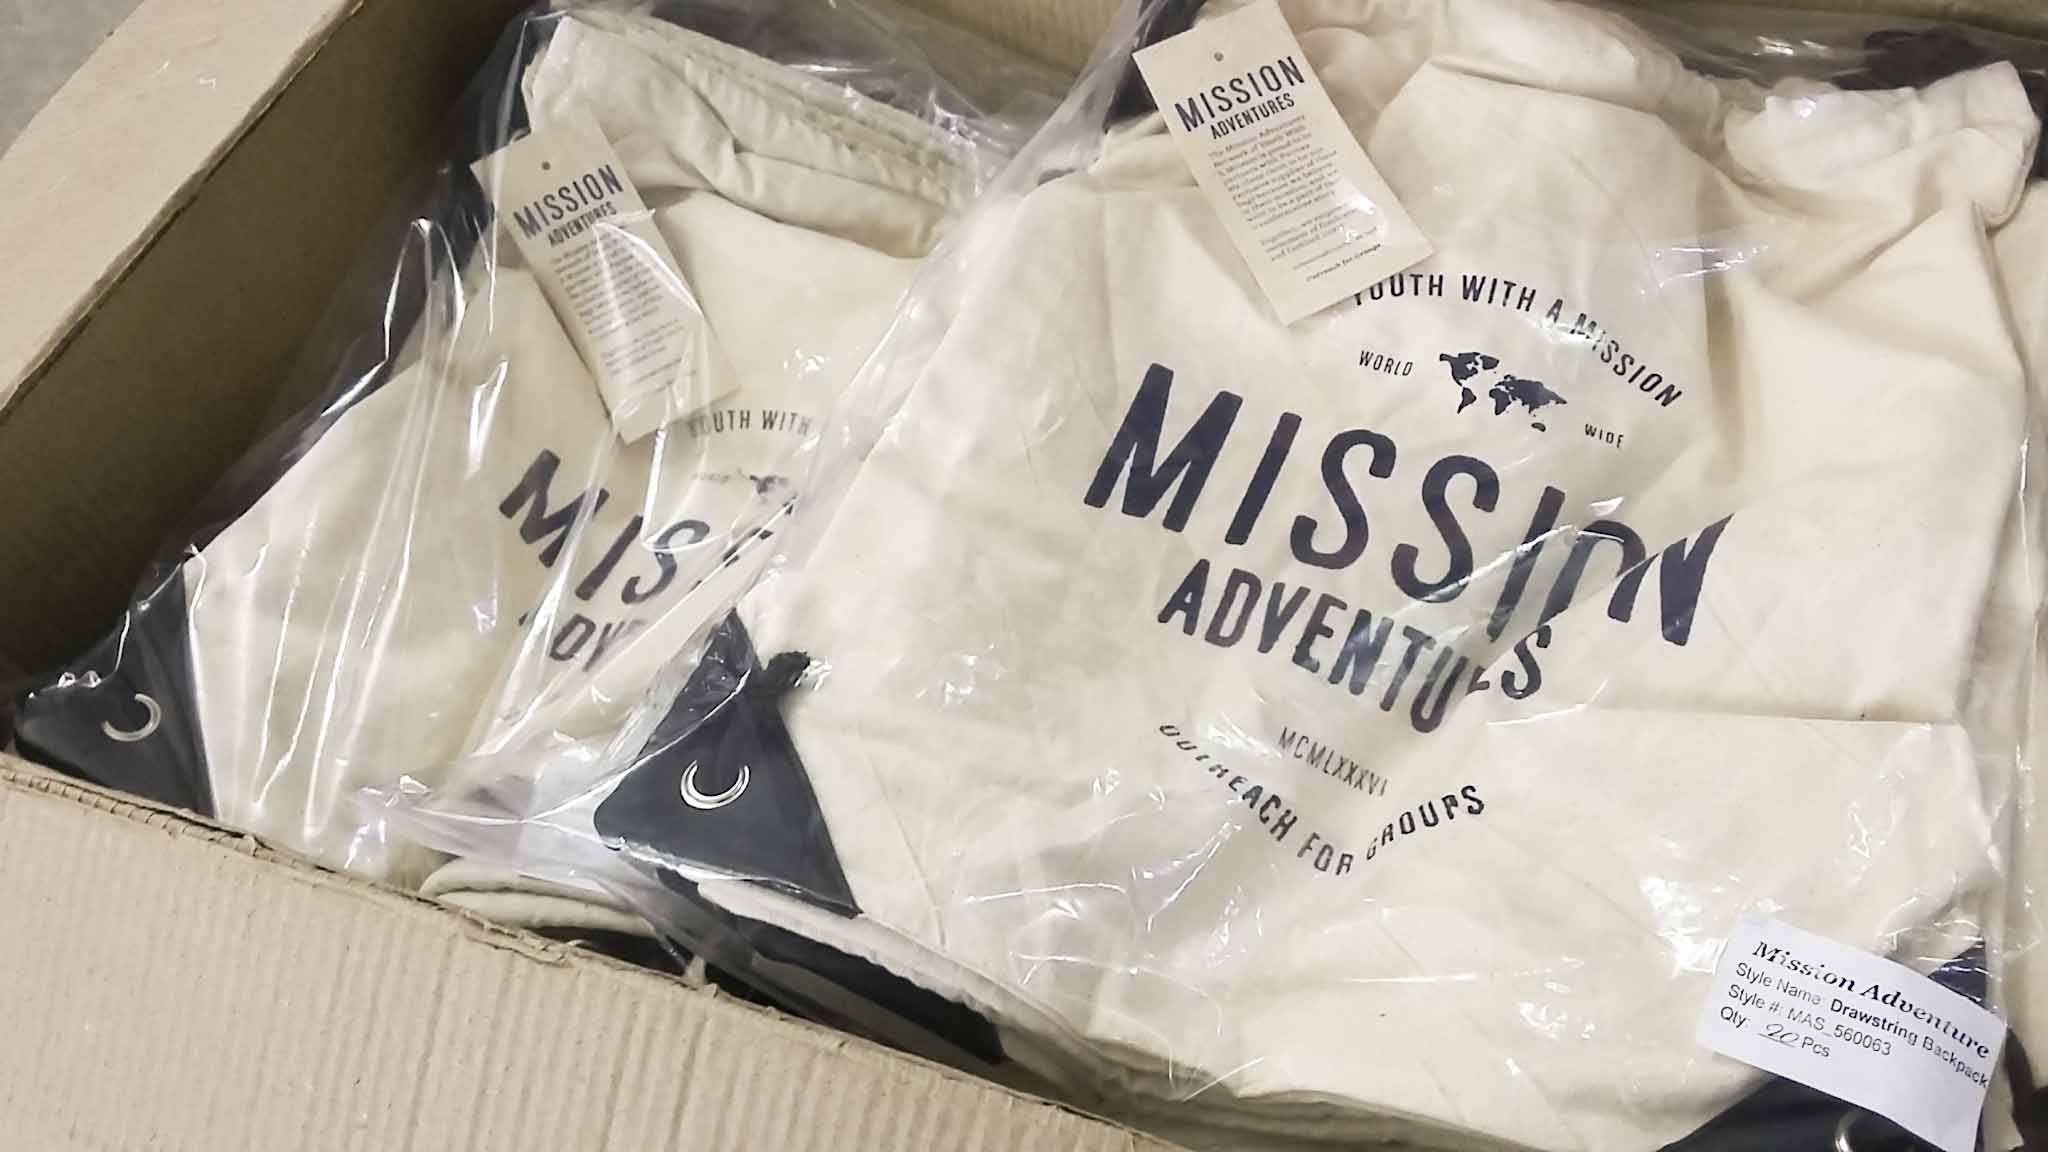 mission adventures bag in production 6.jpg